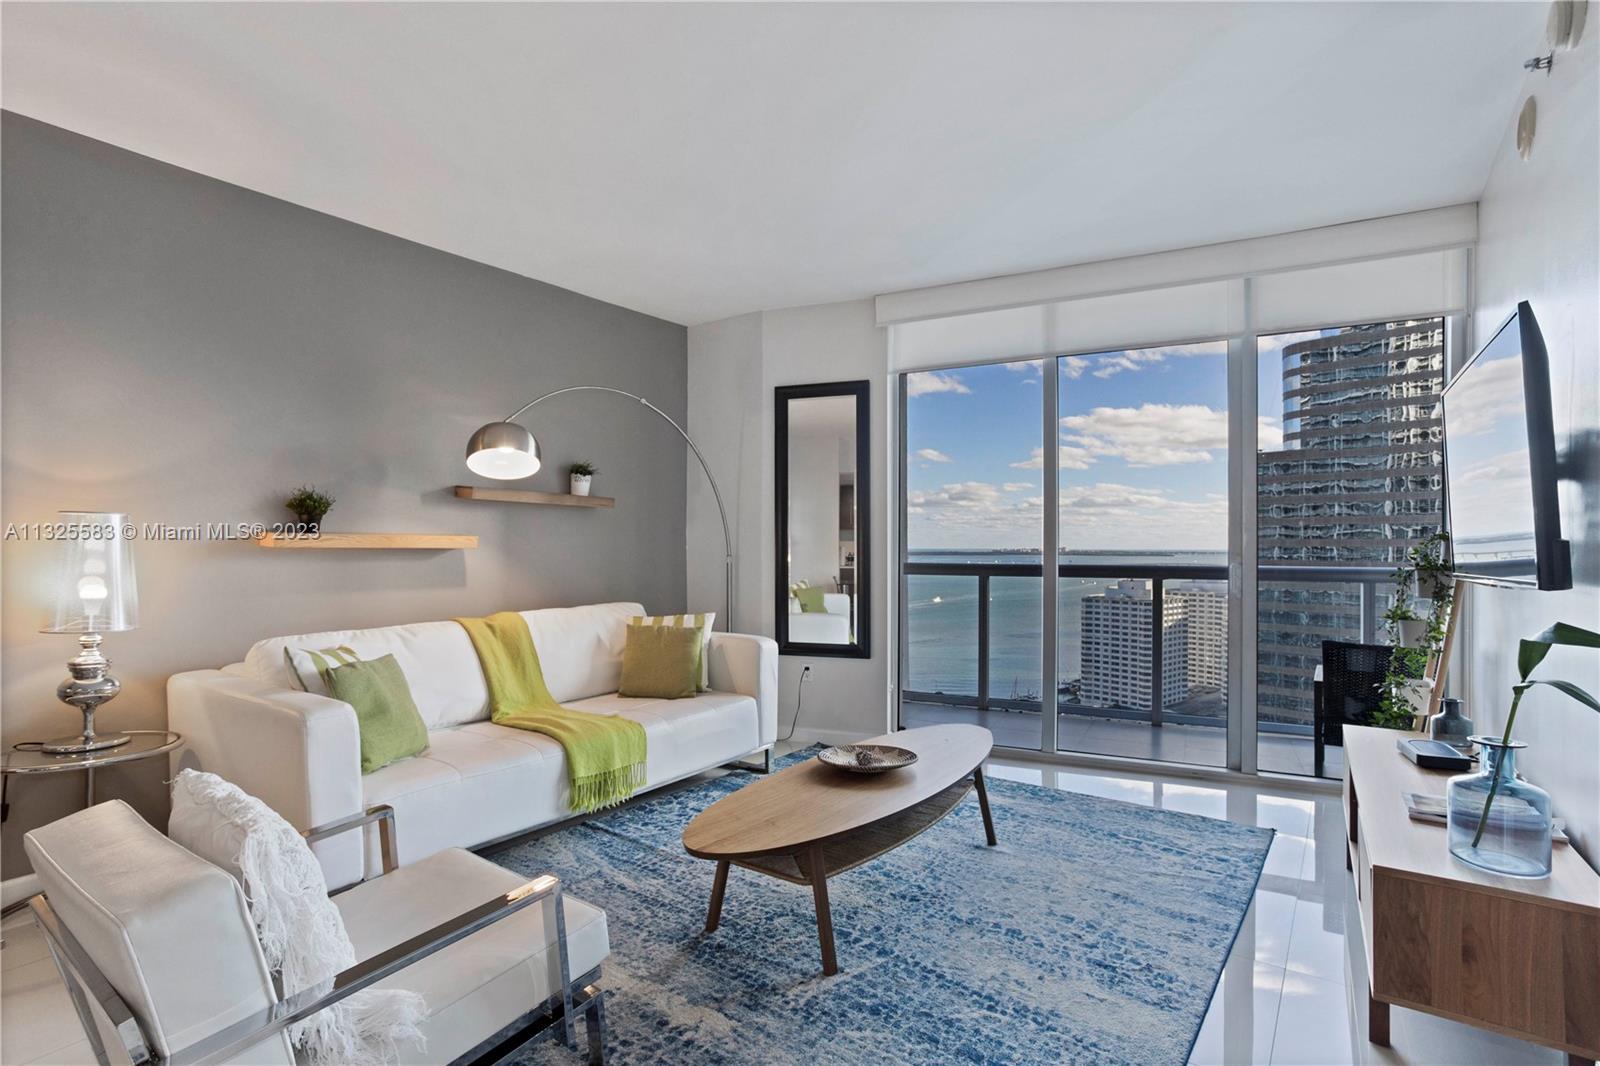 AMAZING INVESTMENT OPPORTUNITY. Best price in BUILDING. Luxury 2-bedroom (legally 1+DEN) with fantastic views of Biscayne Bay and the Brickell Skyline. Turnkey furnished and fully equipped for short-term rentals and Airbnb.  The building is located in one of the hottest areas of Miami. Walking distance of Brickell City Center, restaurants, bars, banks, and parks. Low maintenance. Icon Brickell (the W Hotel Tower) offers amenities including an exercise room, billiard room, business center, theater, heated lap pool, spa, community room, child play area, 24-hour security, valet parking, and more!